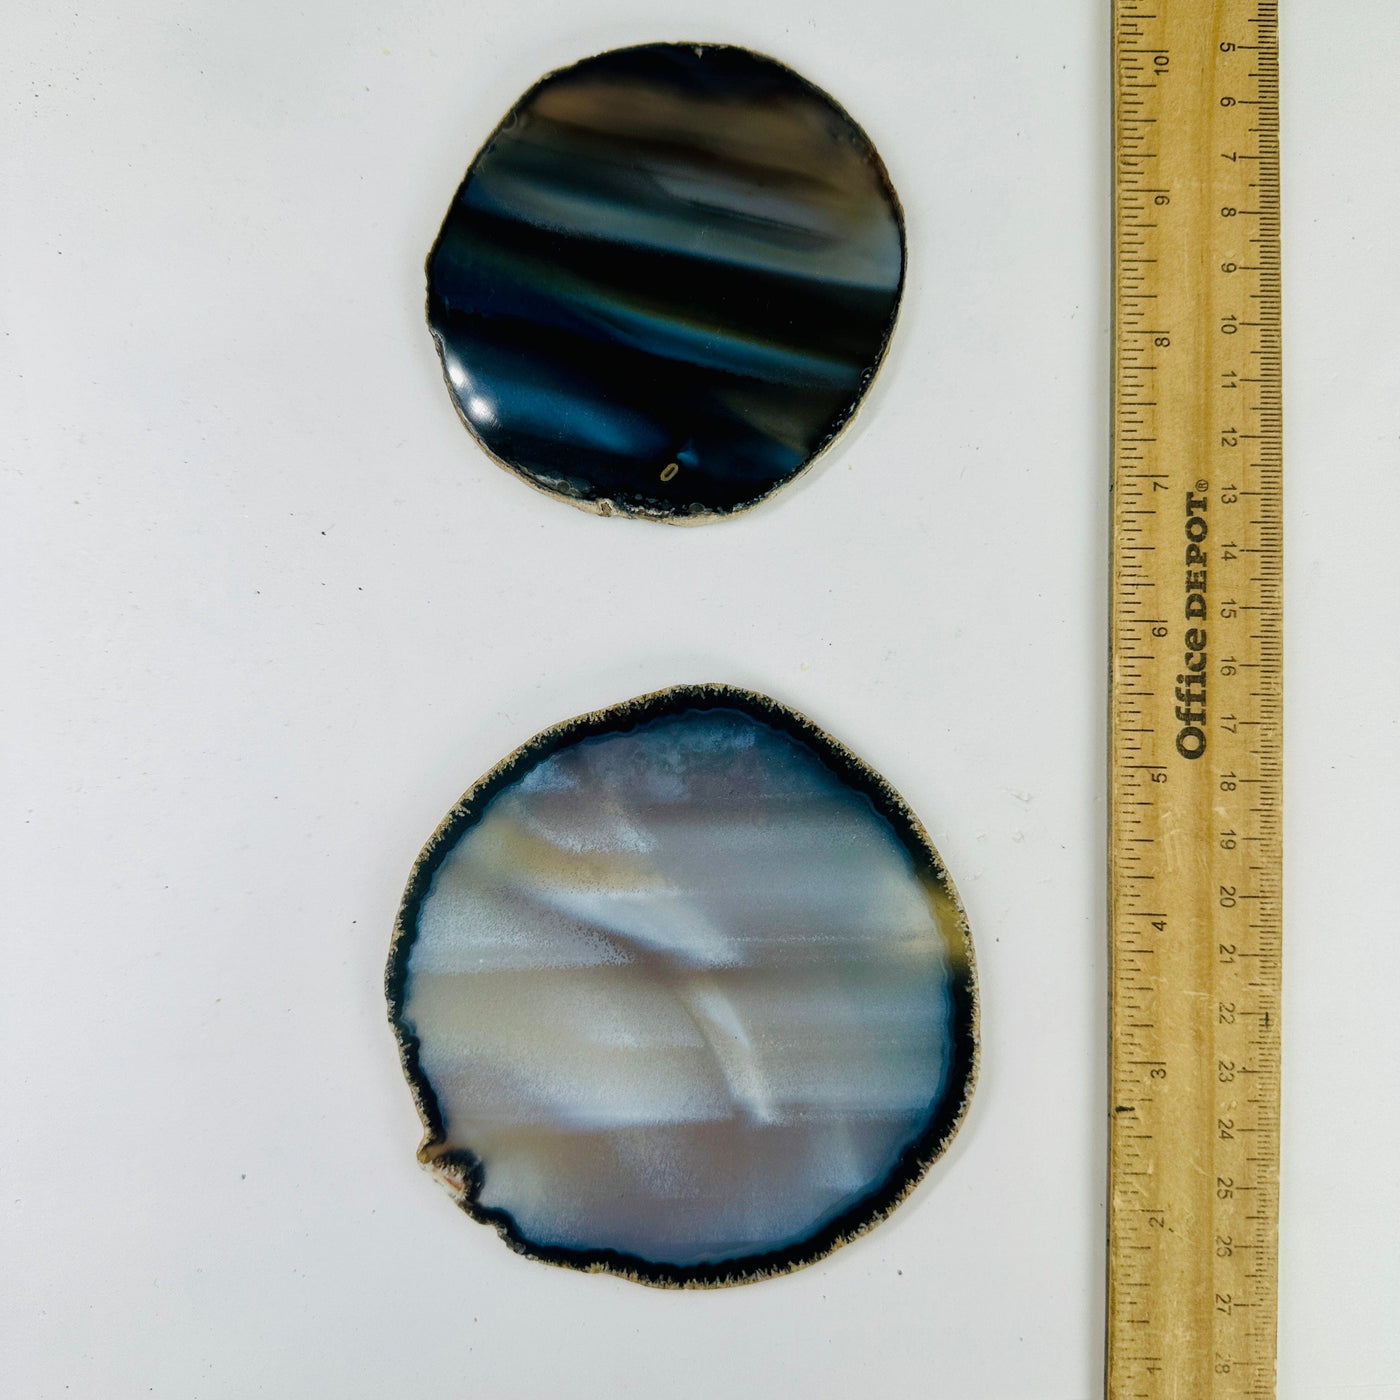  Agate Slice Set - Set of Two Agate Crystal Coasters with ruler for size reference